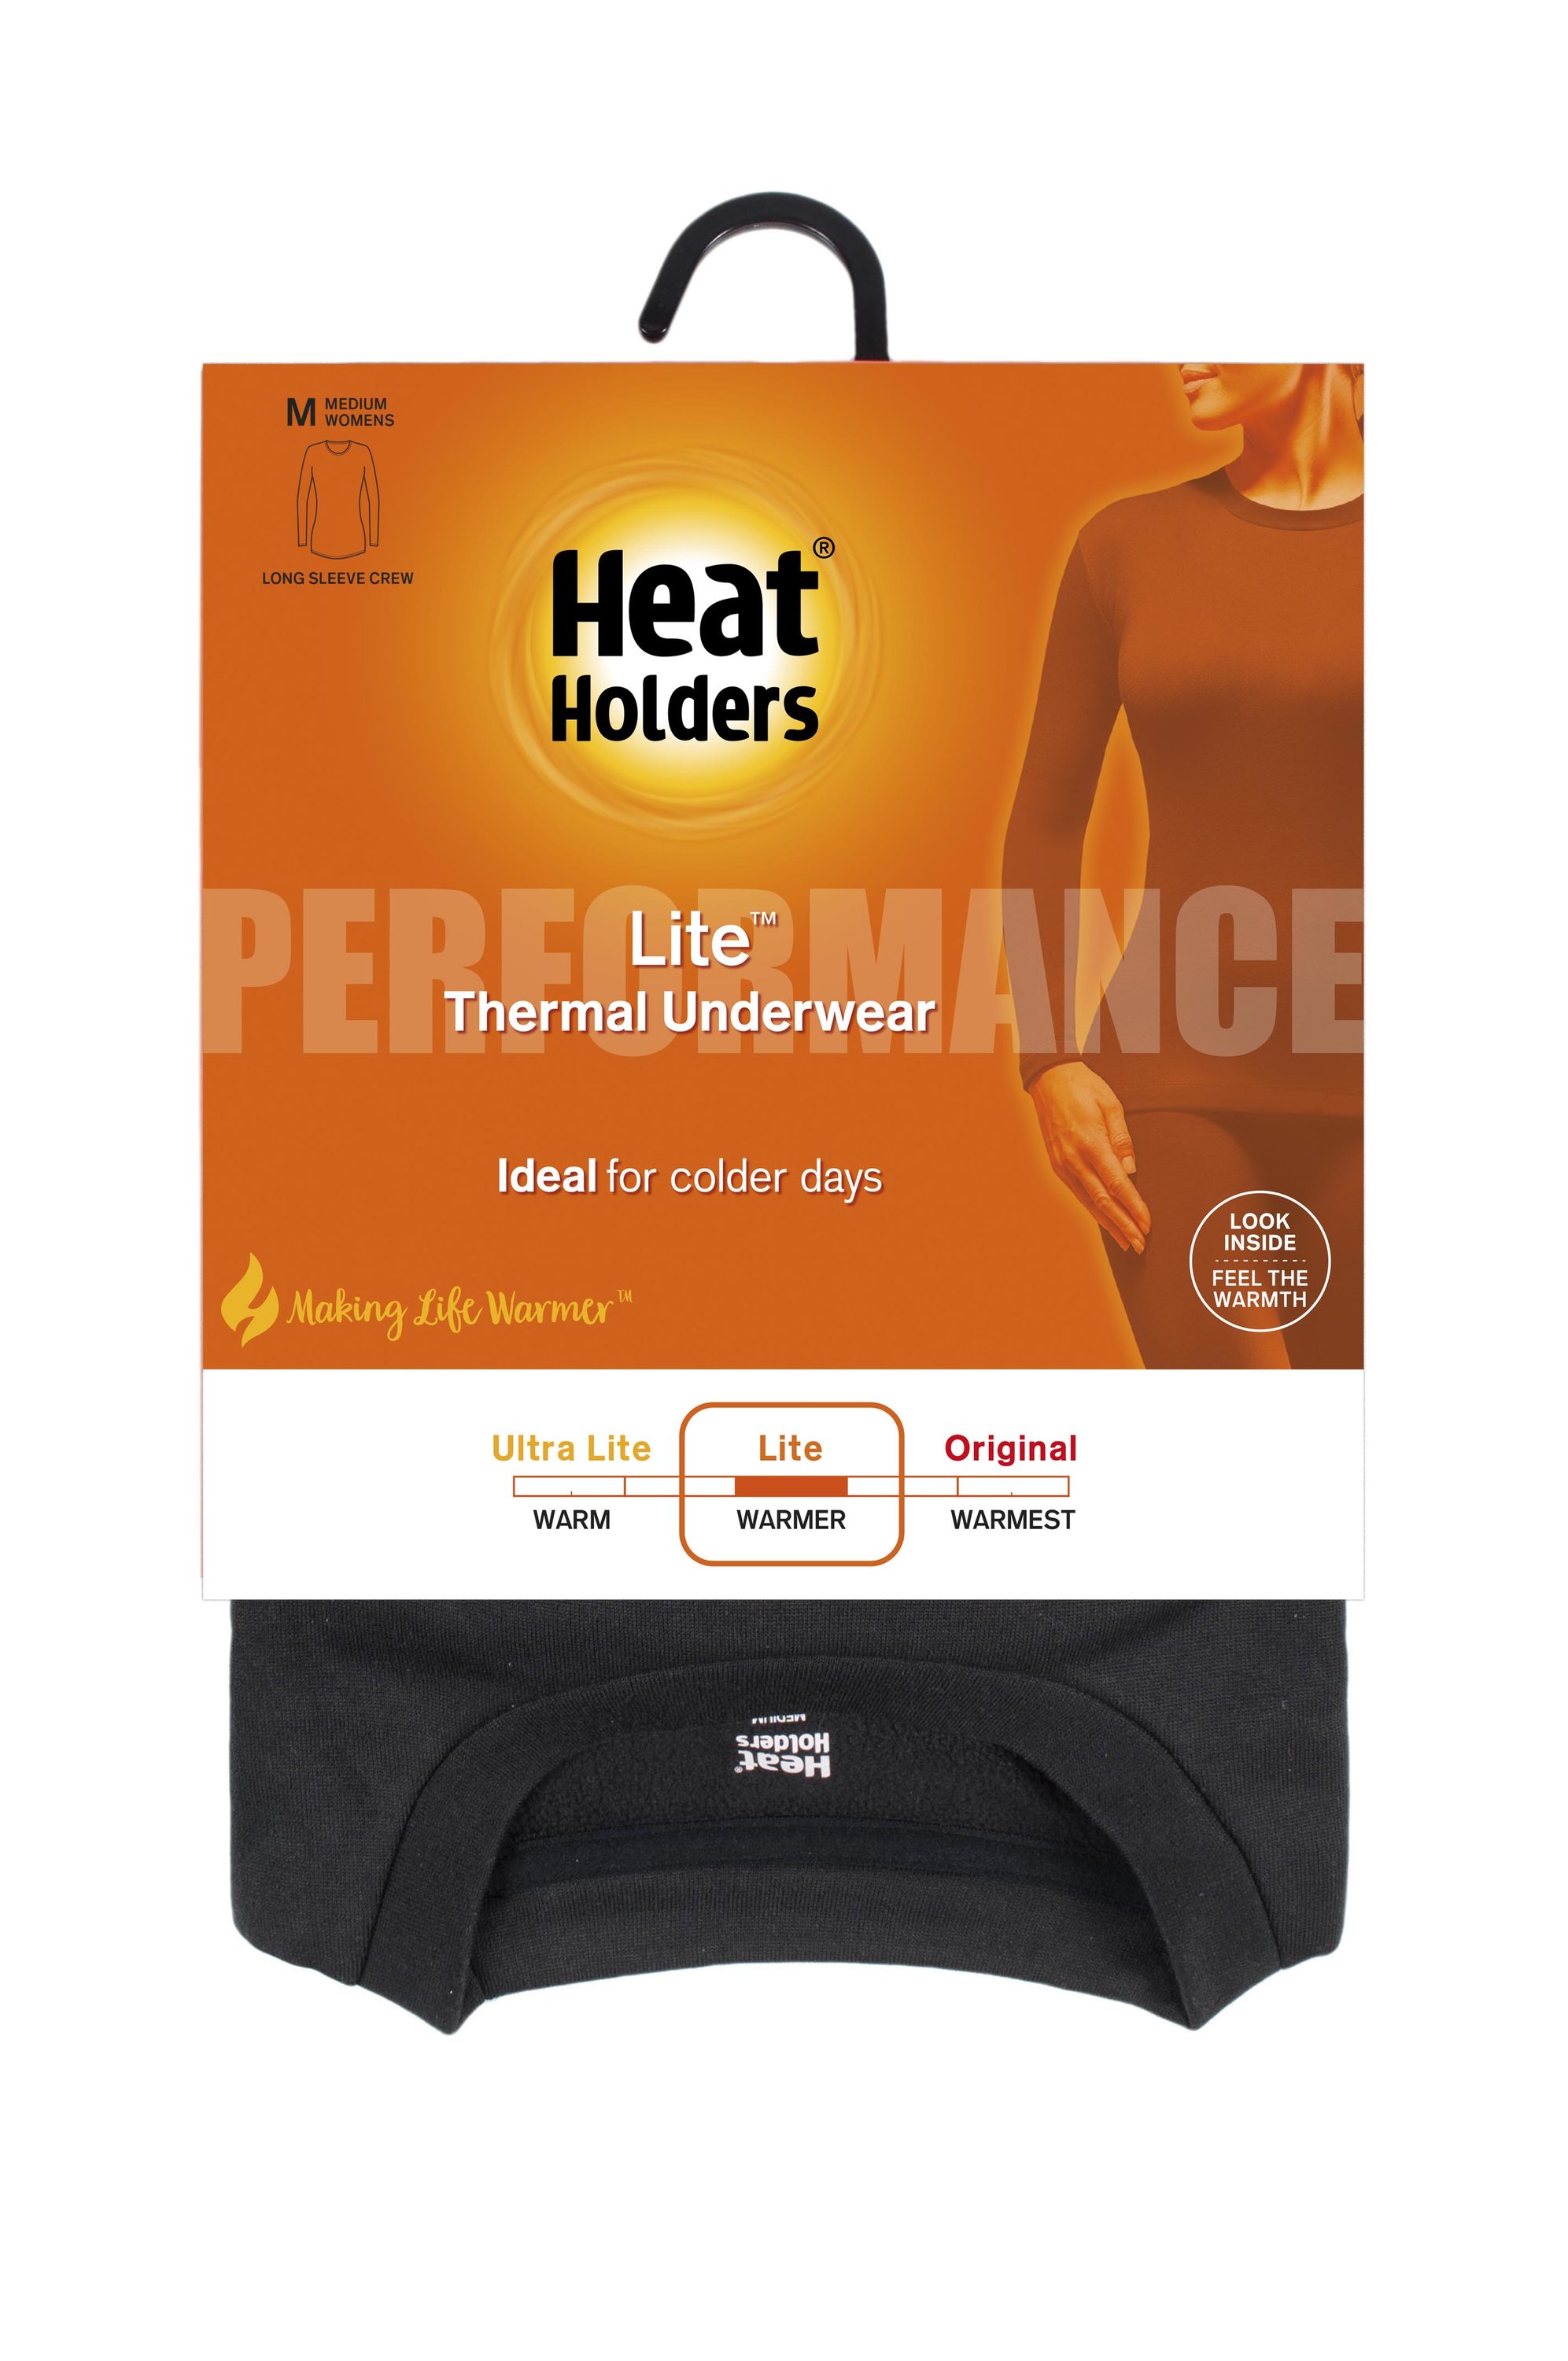 Heat Holders Black Polyester Thermal Base Layer (Medium) in the